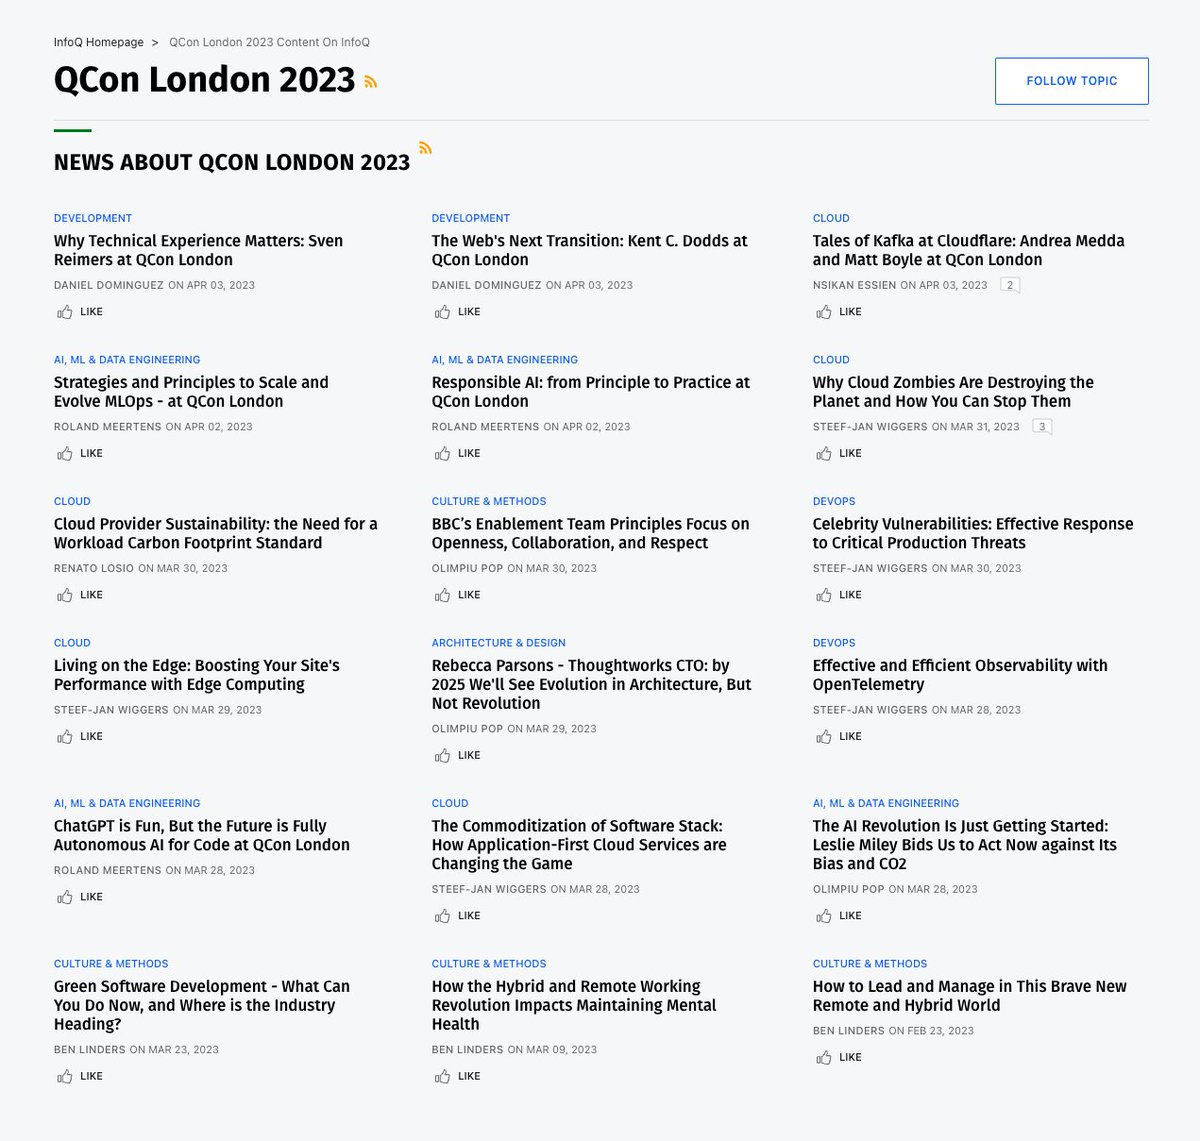 Missed the fantastic #QConLondon event? 😟 No worries, the @InfoQ team have you covered with news and summaries of key sessions! 😊 infoq.com/qcon-london-20…